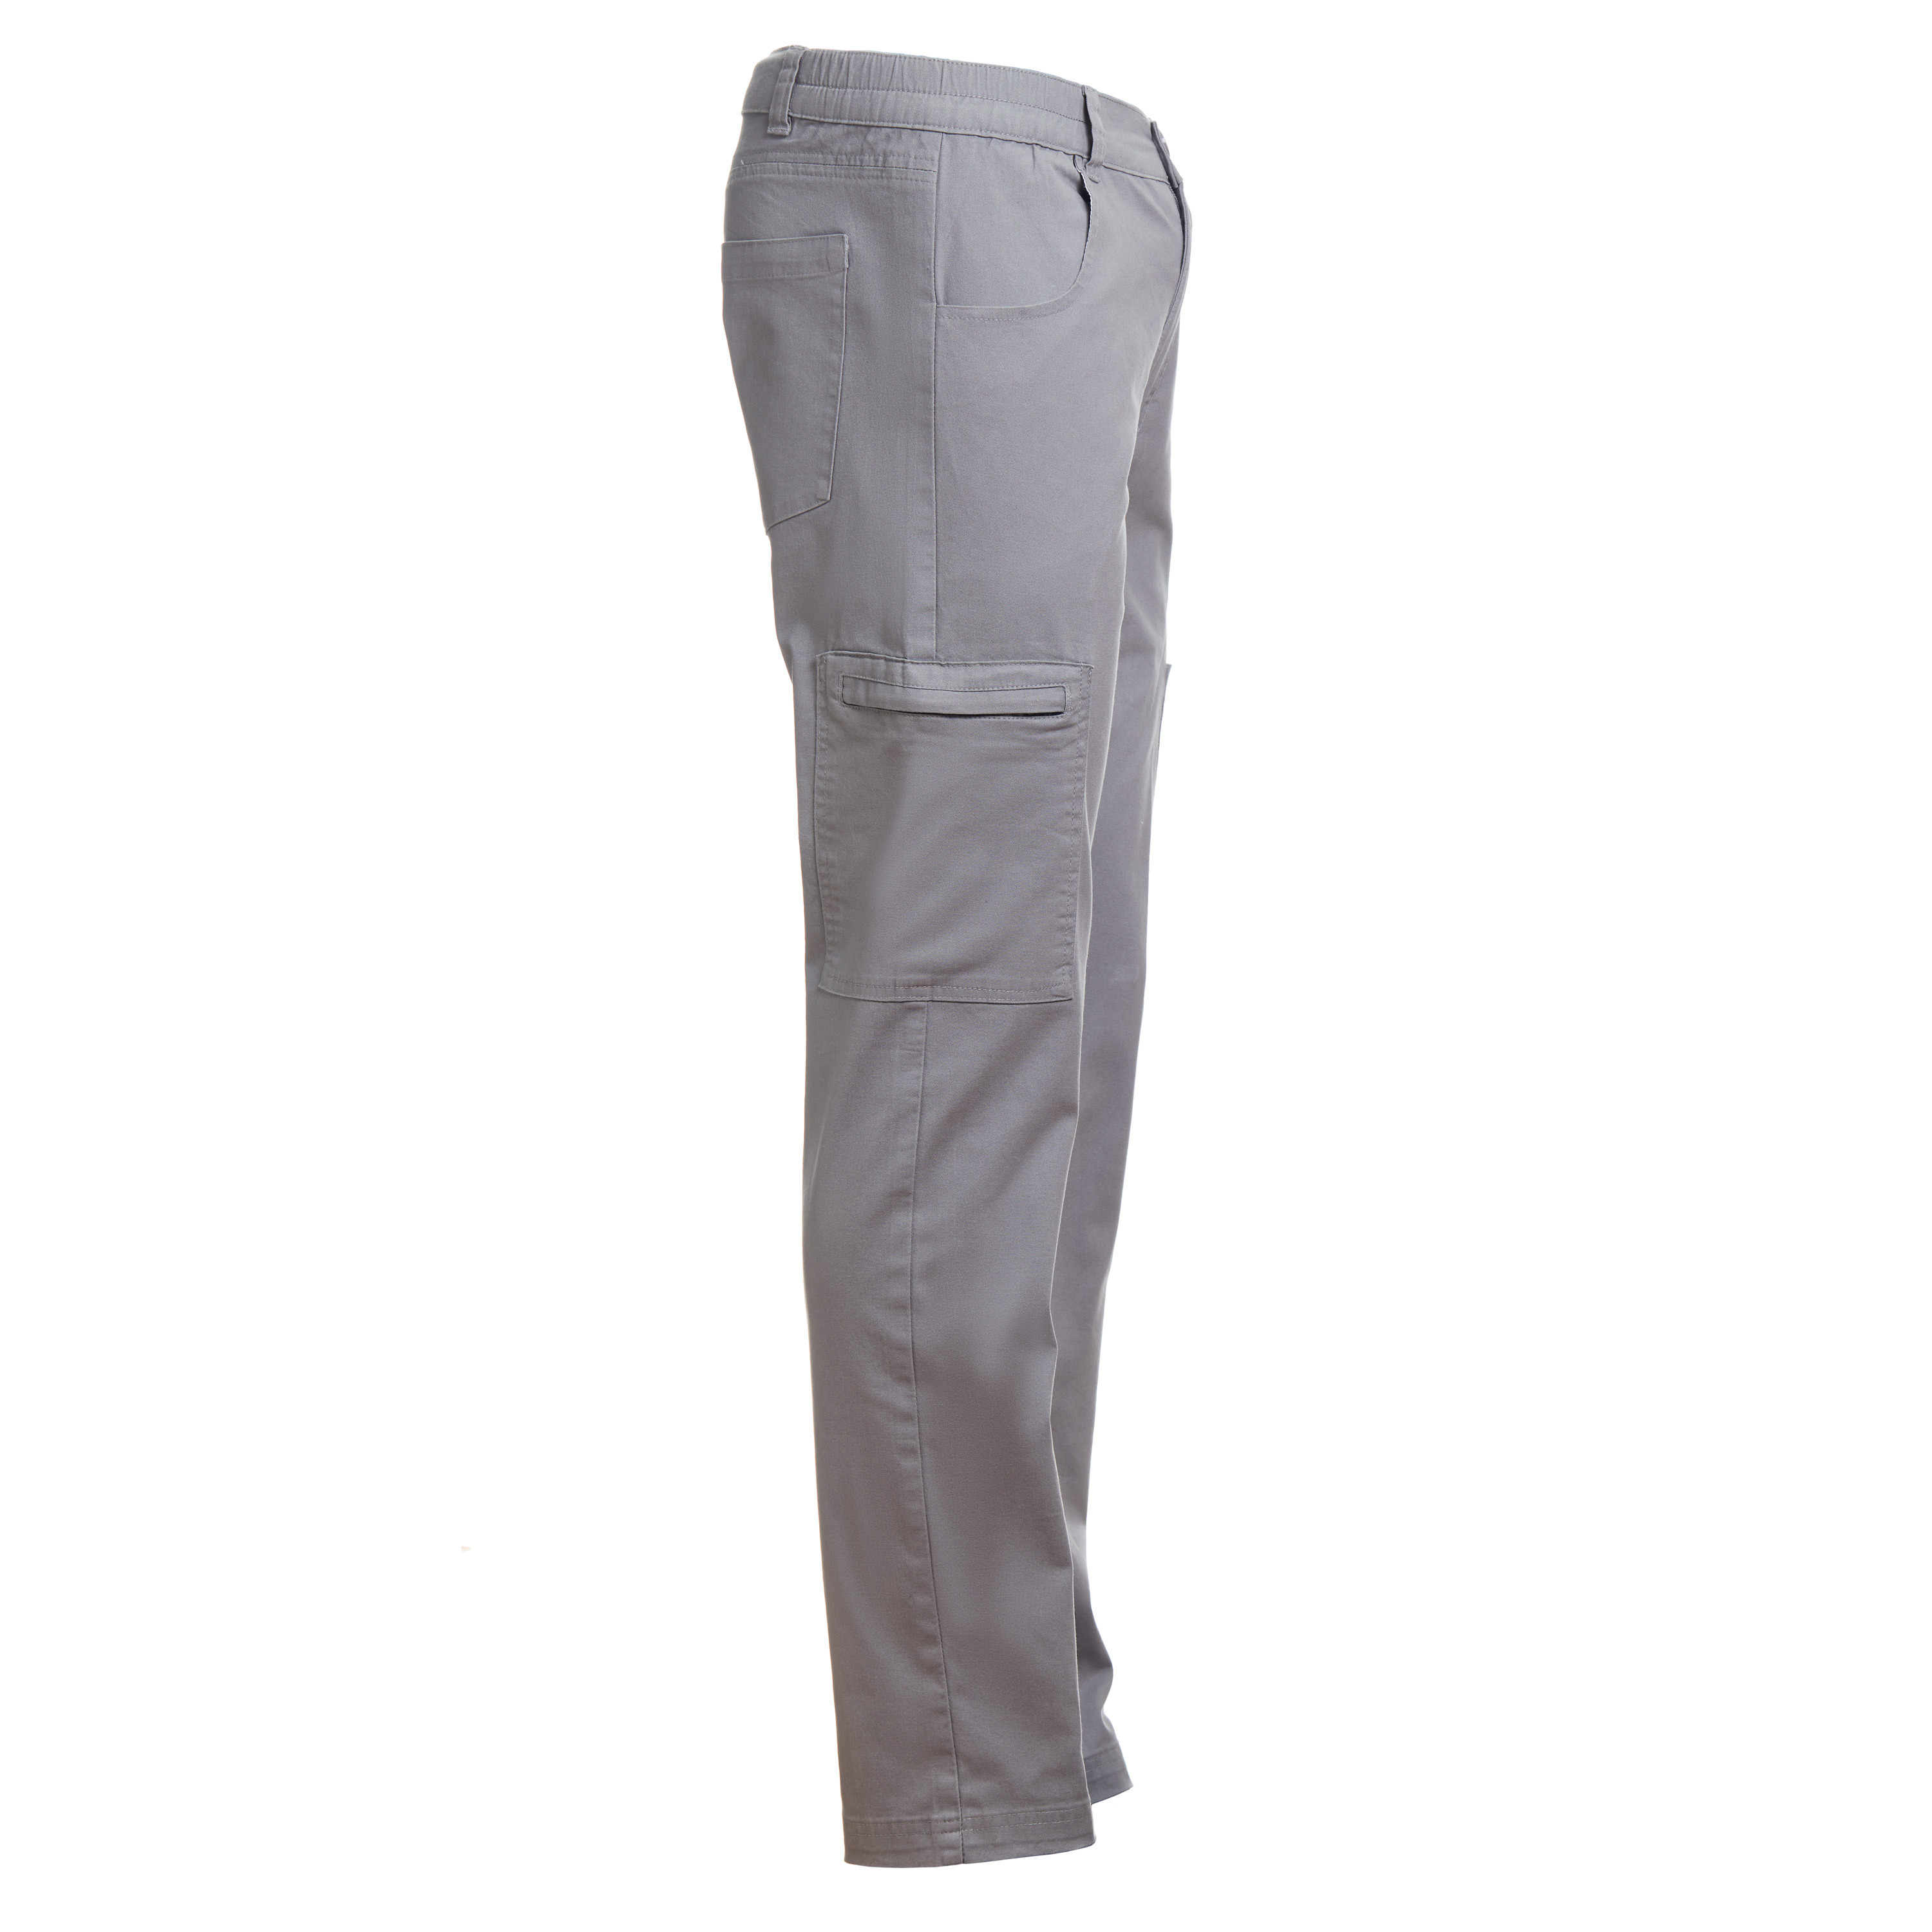 THC Tallin - Workwear trousers with side pockets 240g